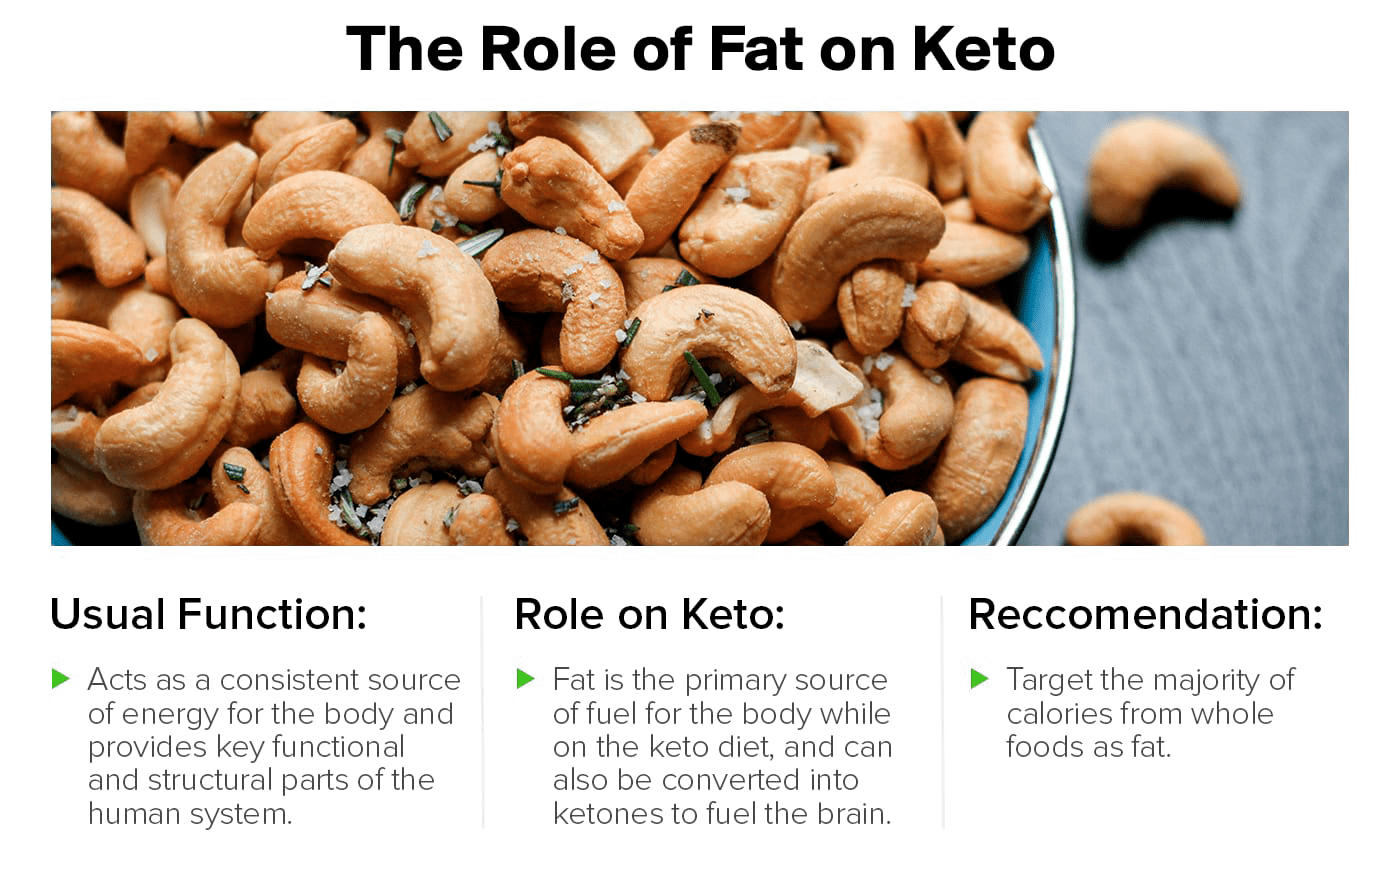 Fat on the Keto Diet